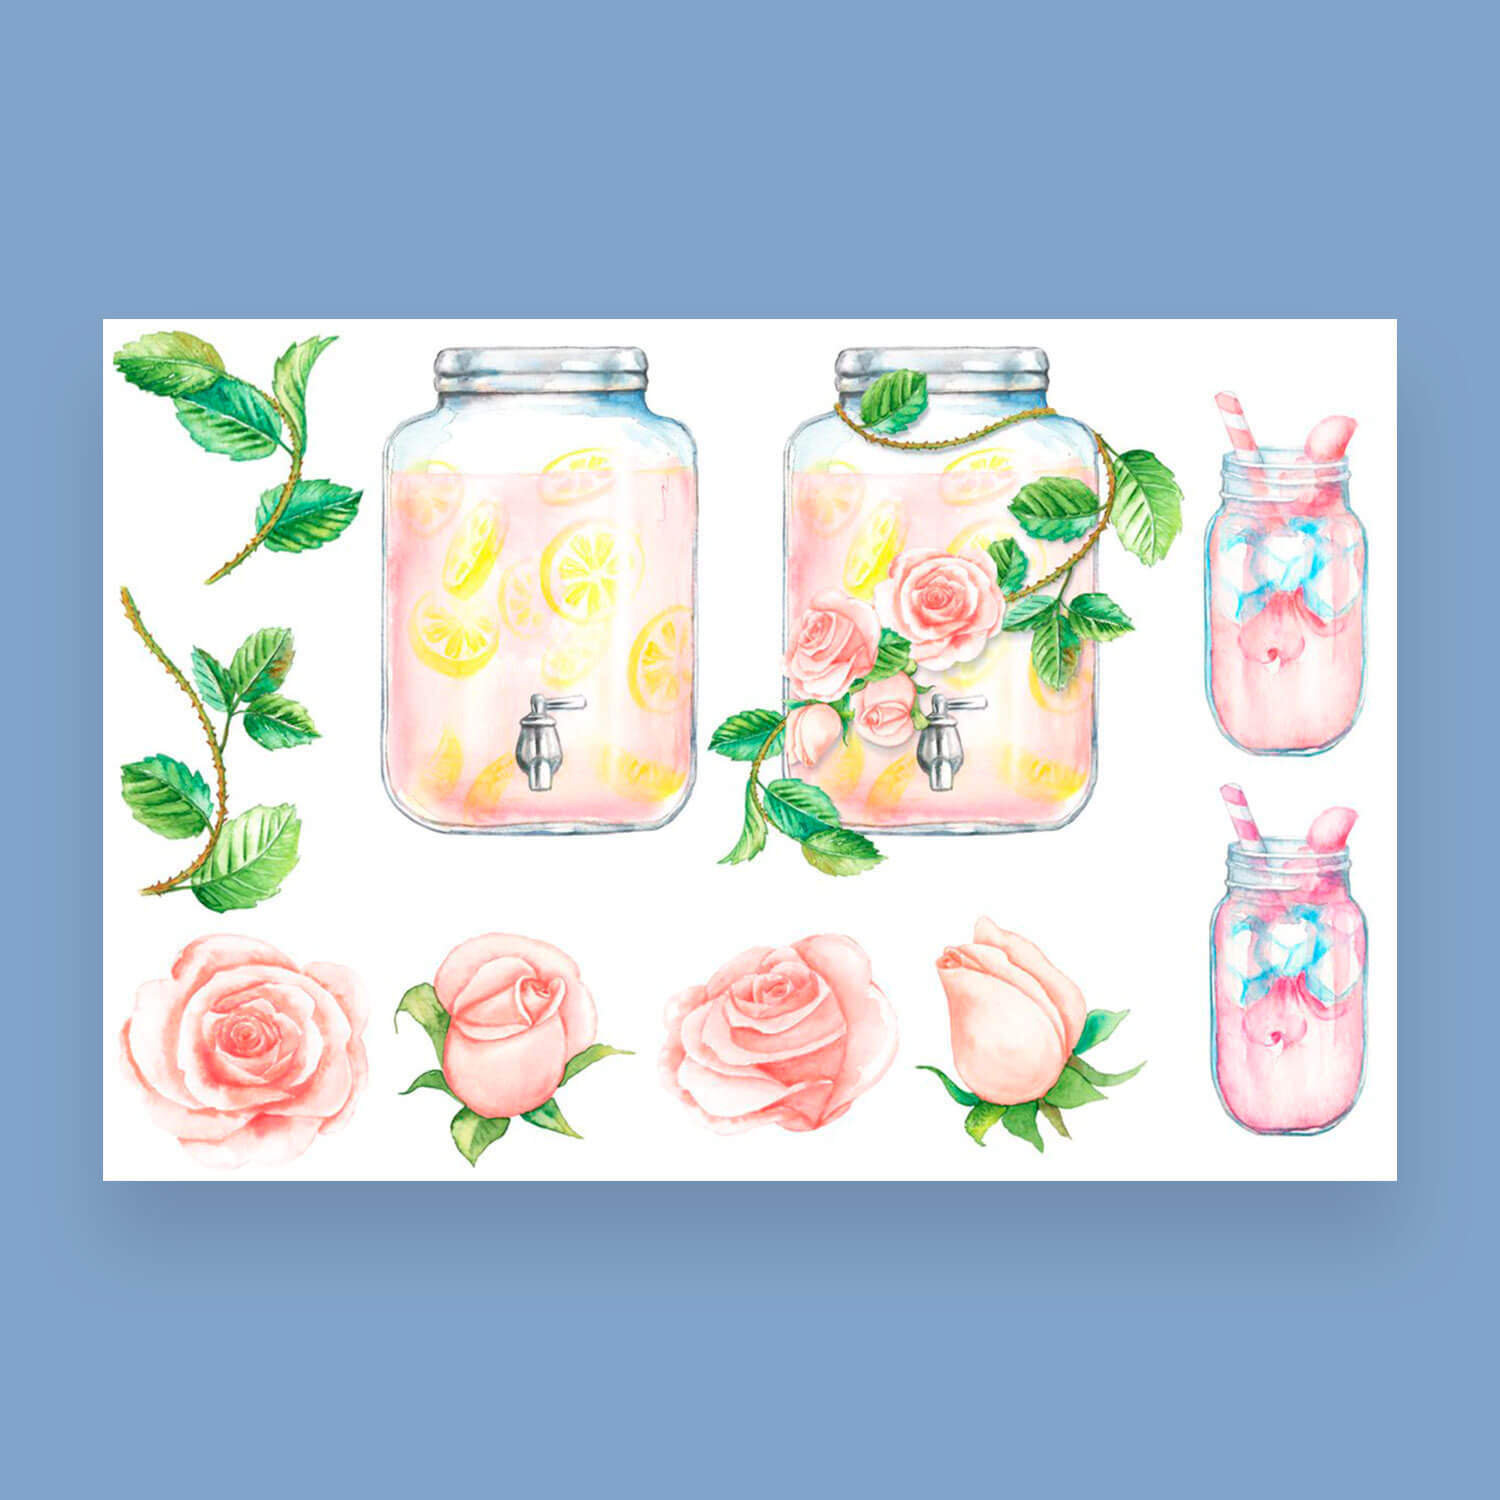 Drawings of watercolor roses and branches, jars and glasses with lemonade.